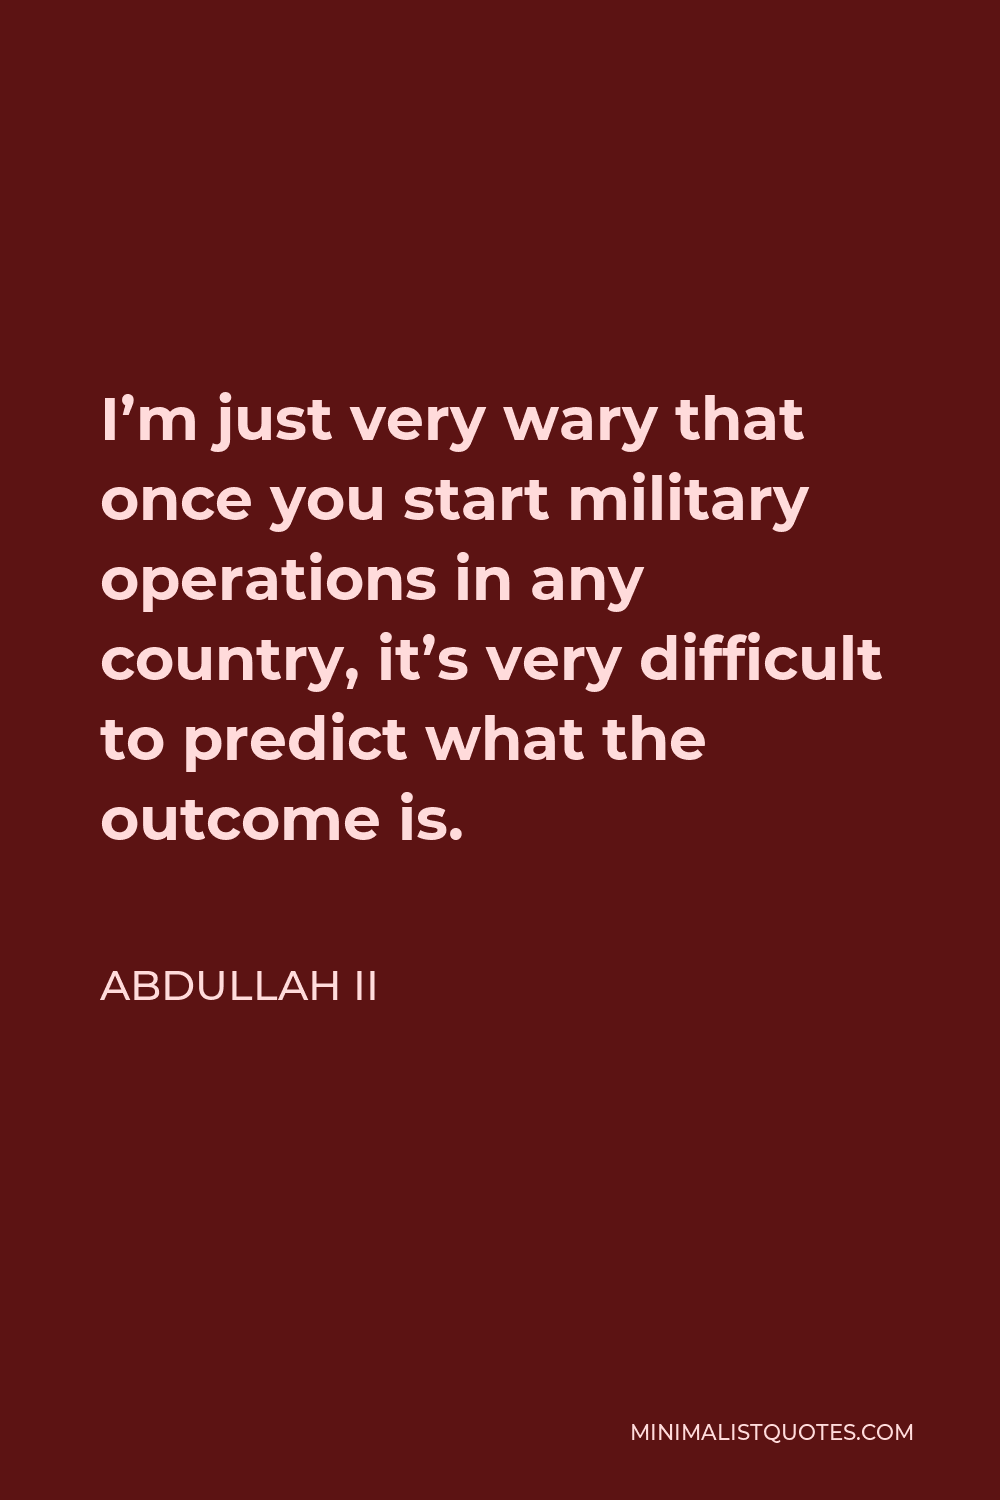 Abdullah II Quote - I’m just very wary that once you start military operations in any country, it’s very difficult to predict what the outcome is.